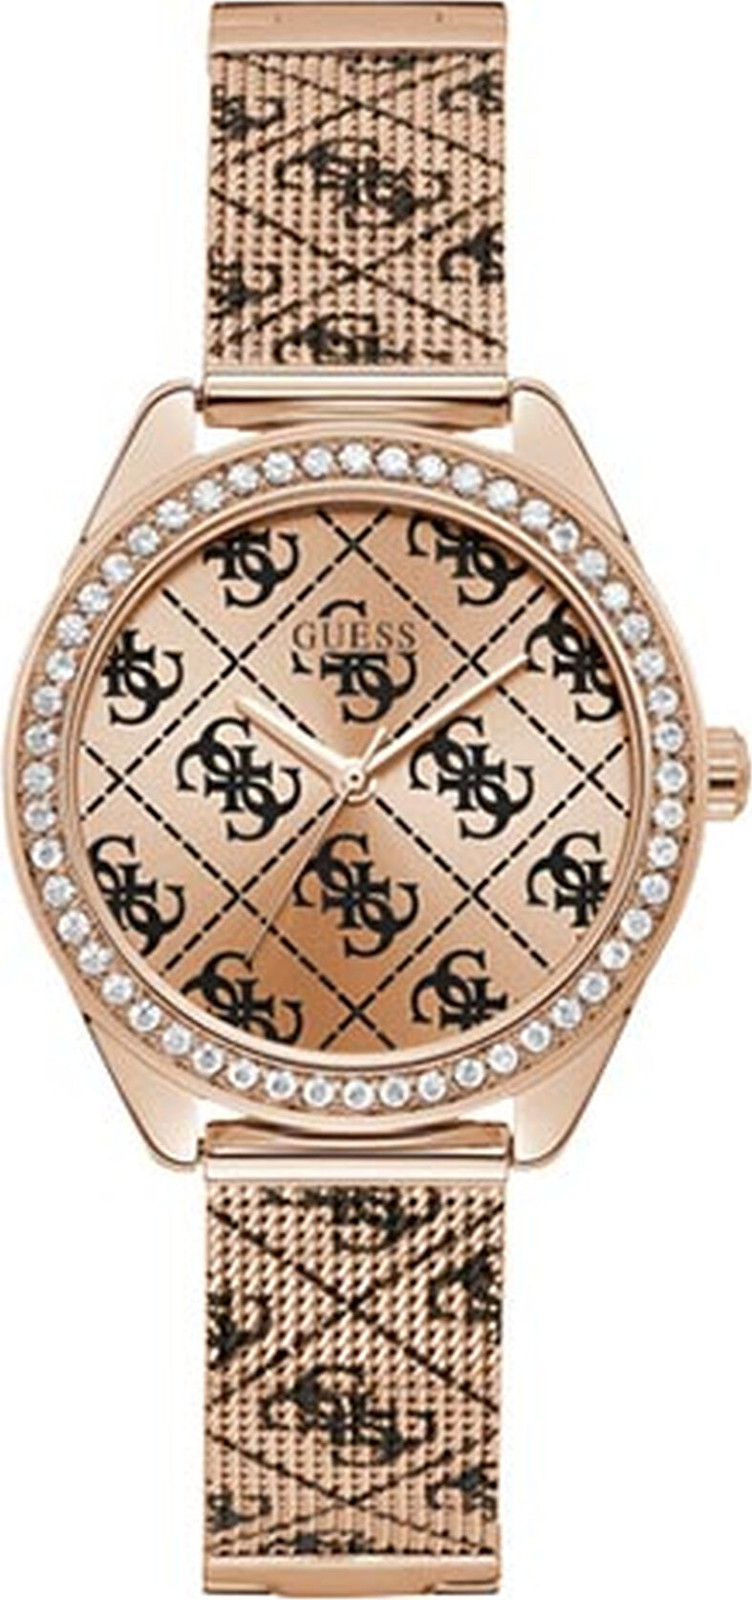 Hodinky Guess Claudia Mesh W1279L3 ROSE GOLD